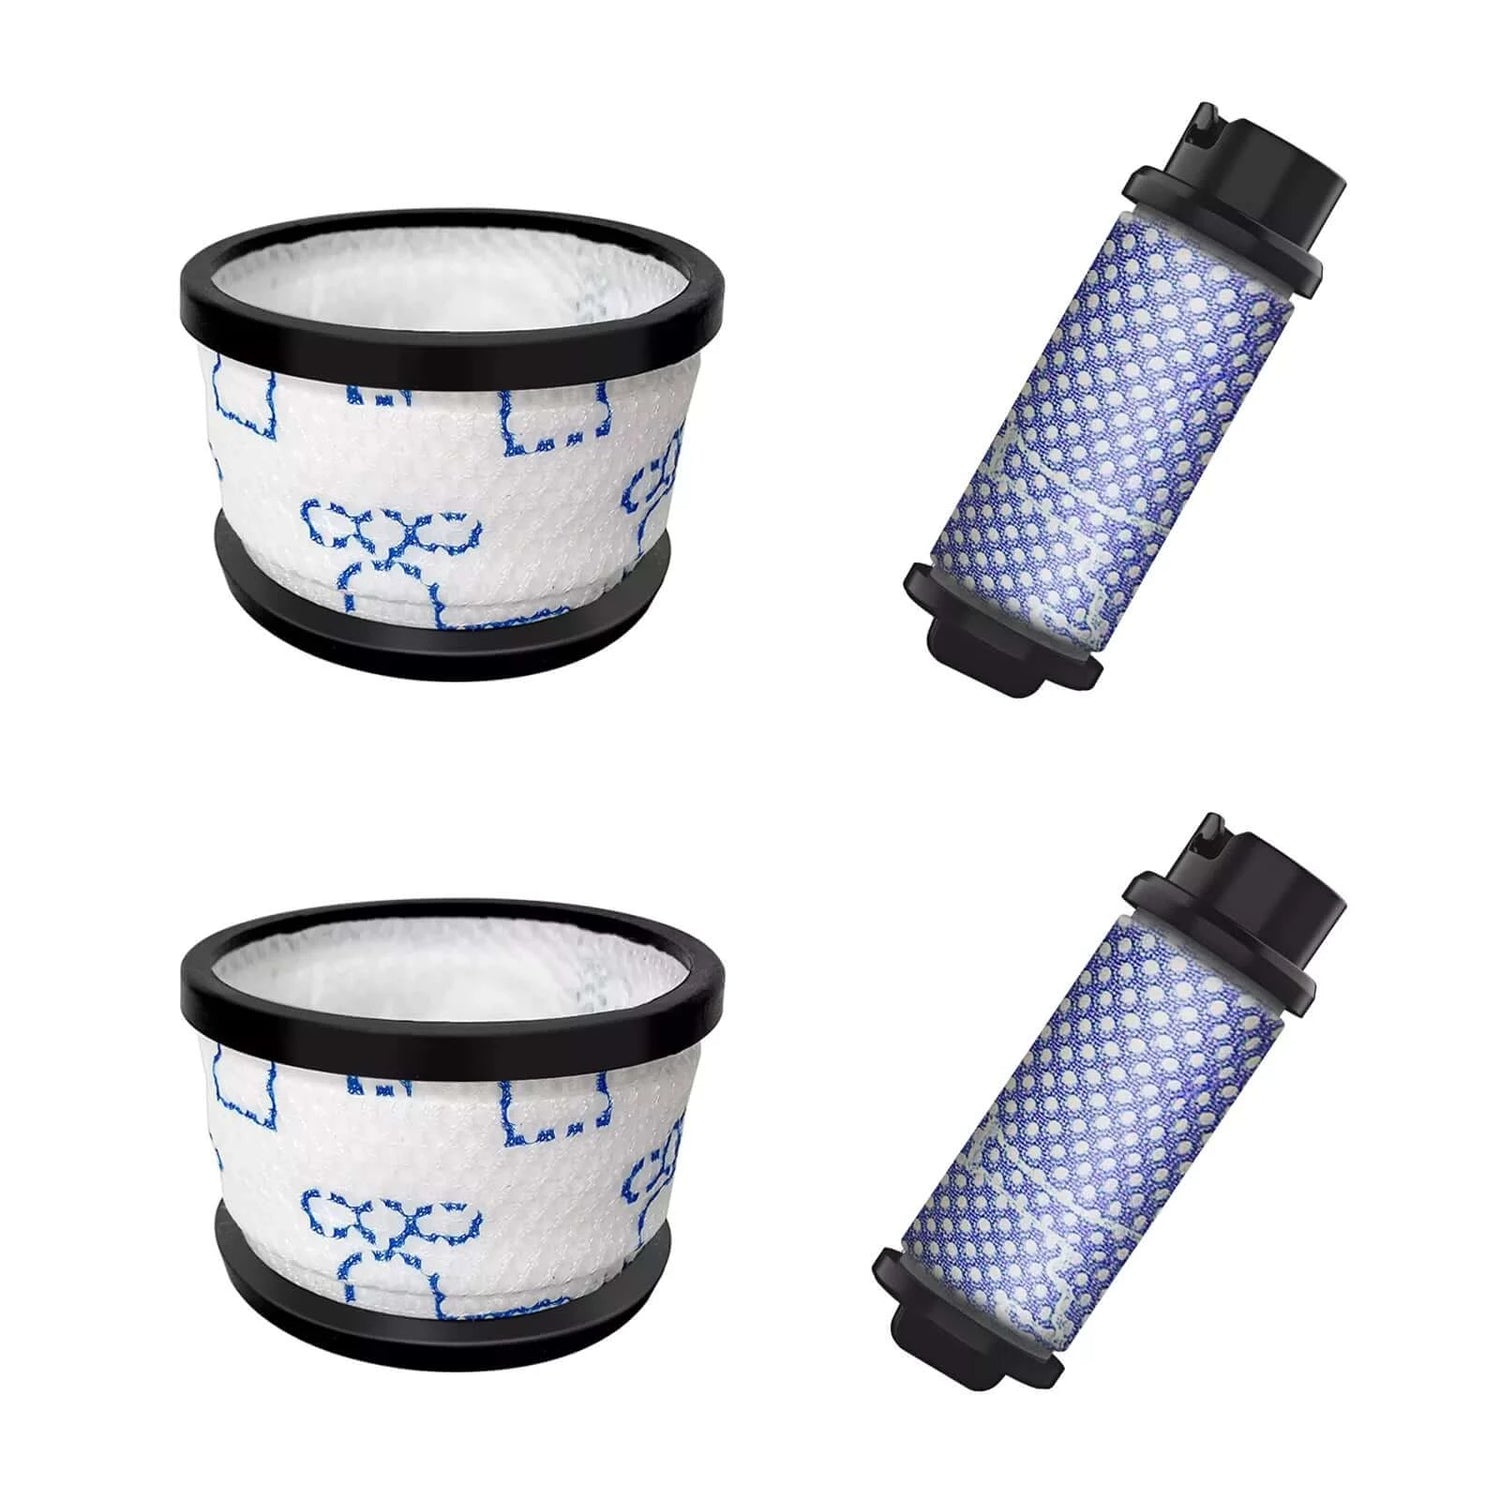 INSE N5/S6/S6P/S600 Cordless Vacuum Filters - OriginalStyle: Cotton Filter-2 Purple and 2 White-inselife.com